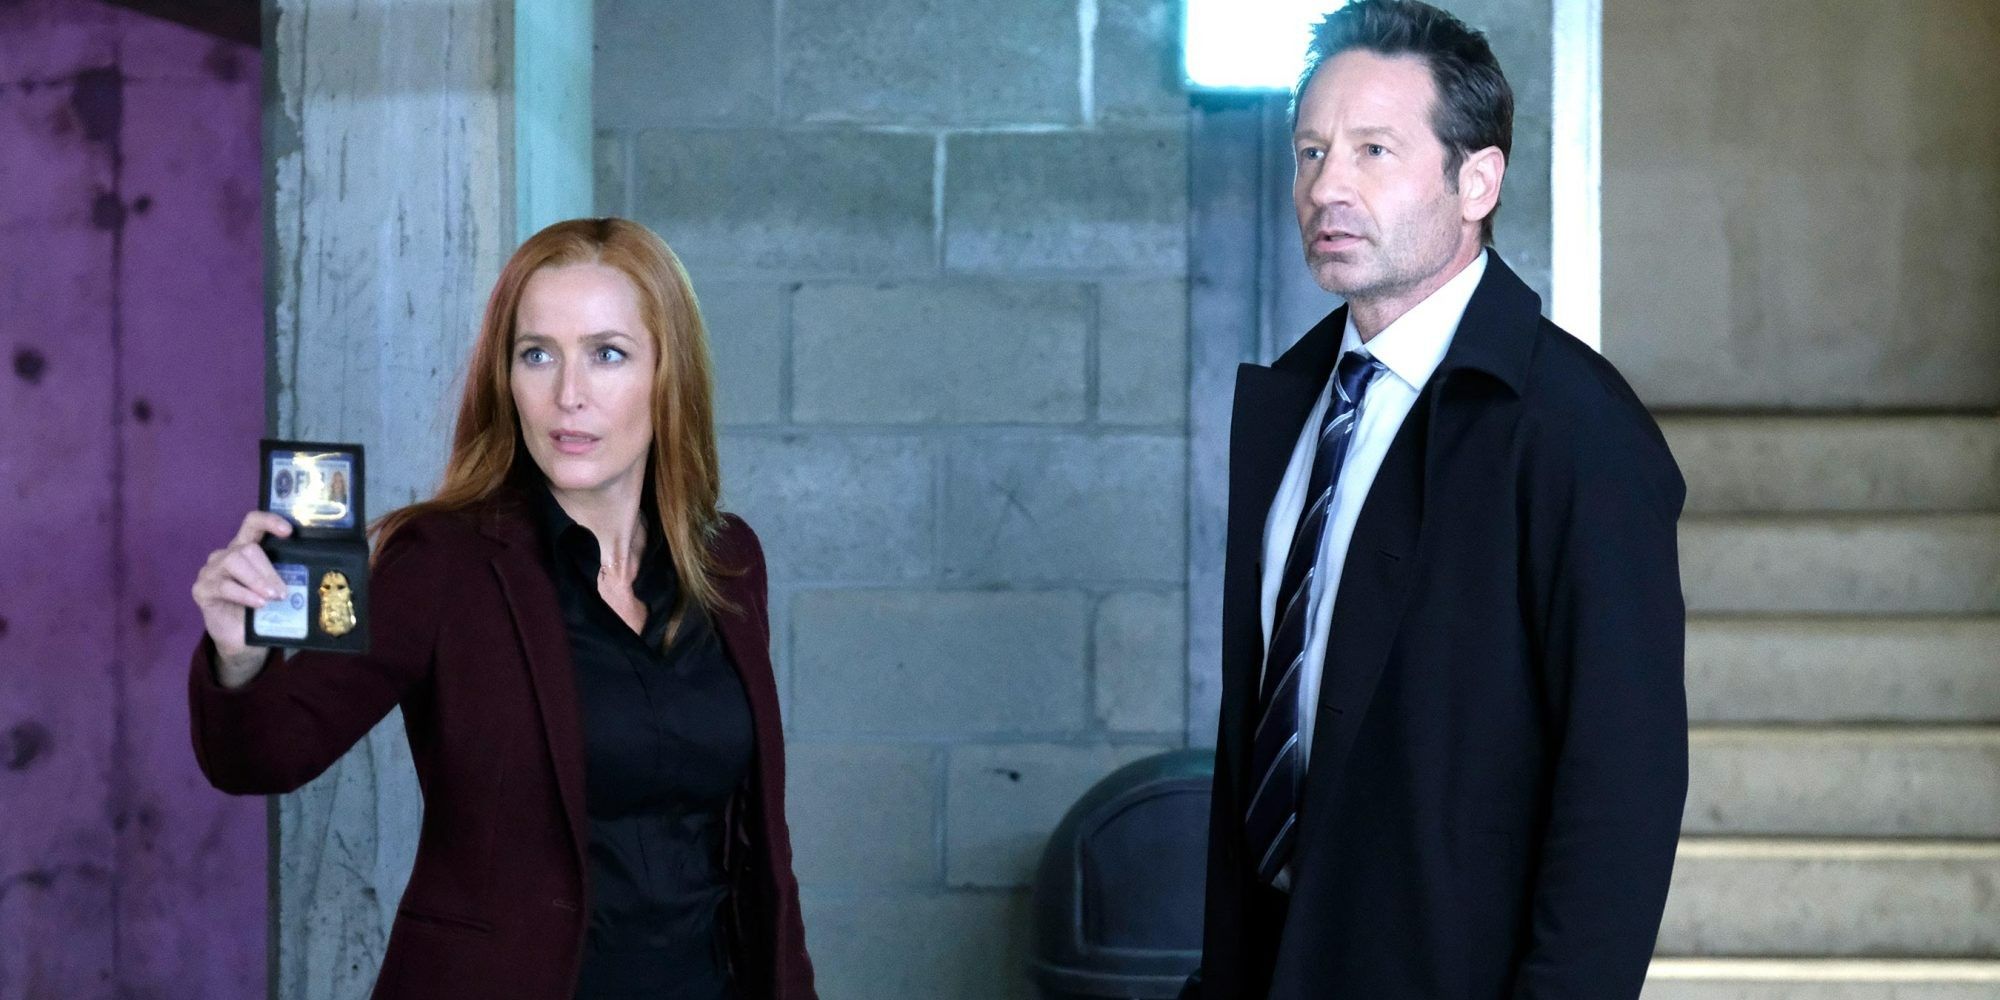 Gillian Anderson's Scully showing her badge while David Duchovny's Mulder looks in the X-Files revival